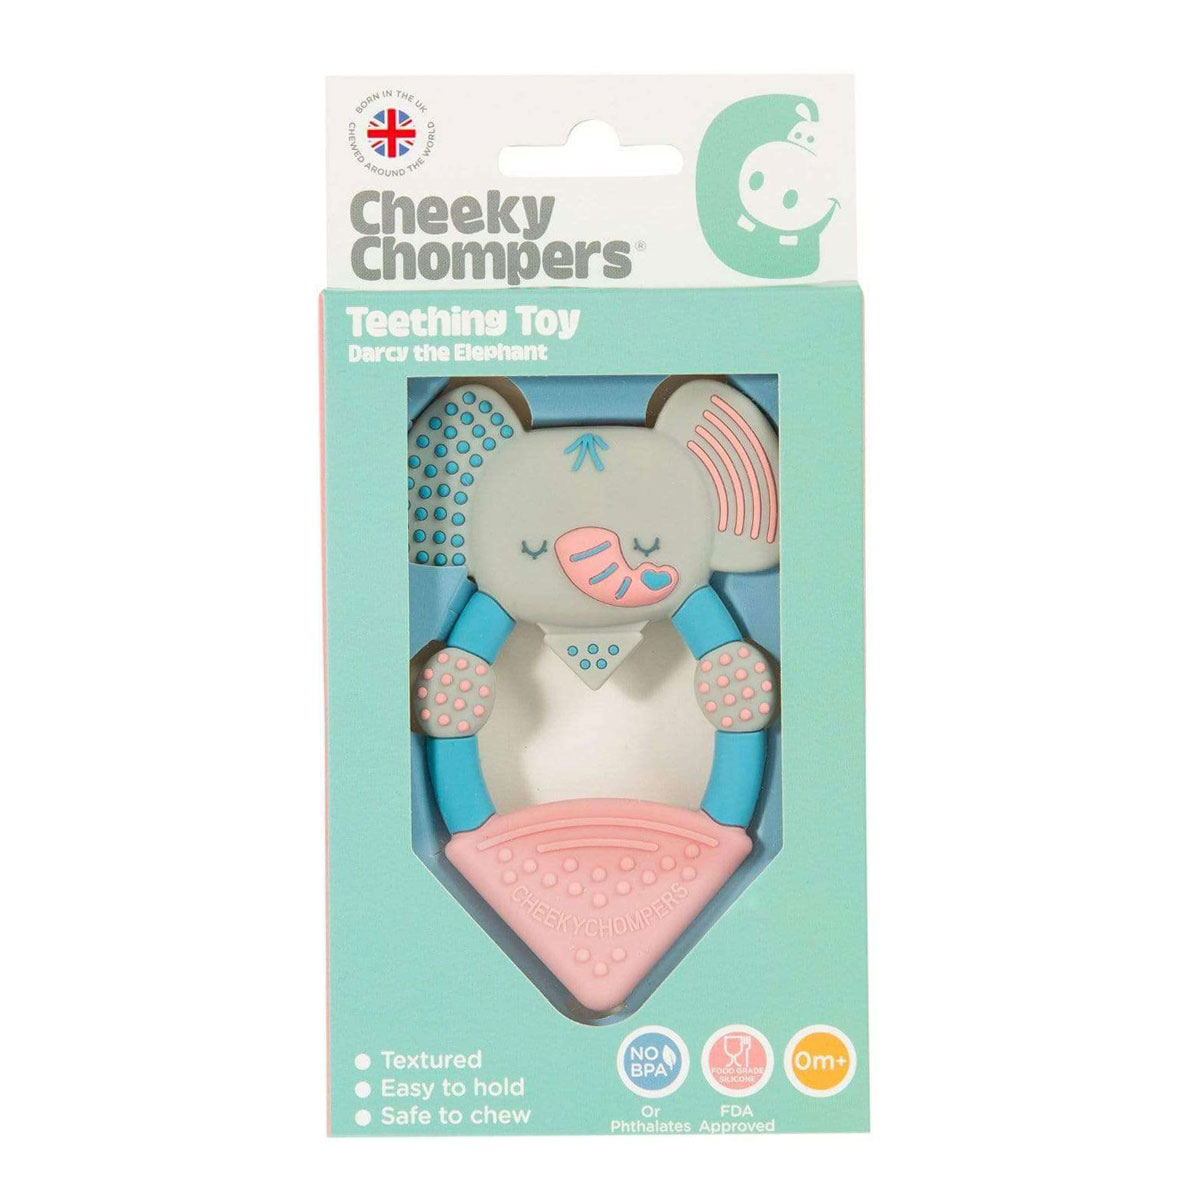 Cheeky-Chompers-Darcy the Elephant Teether